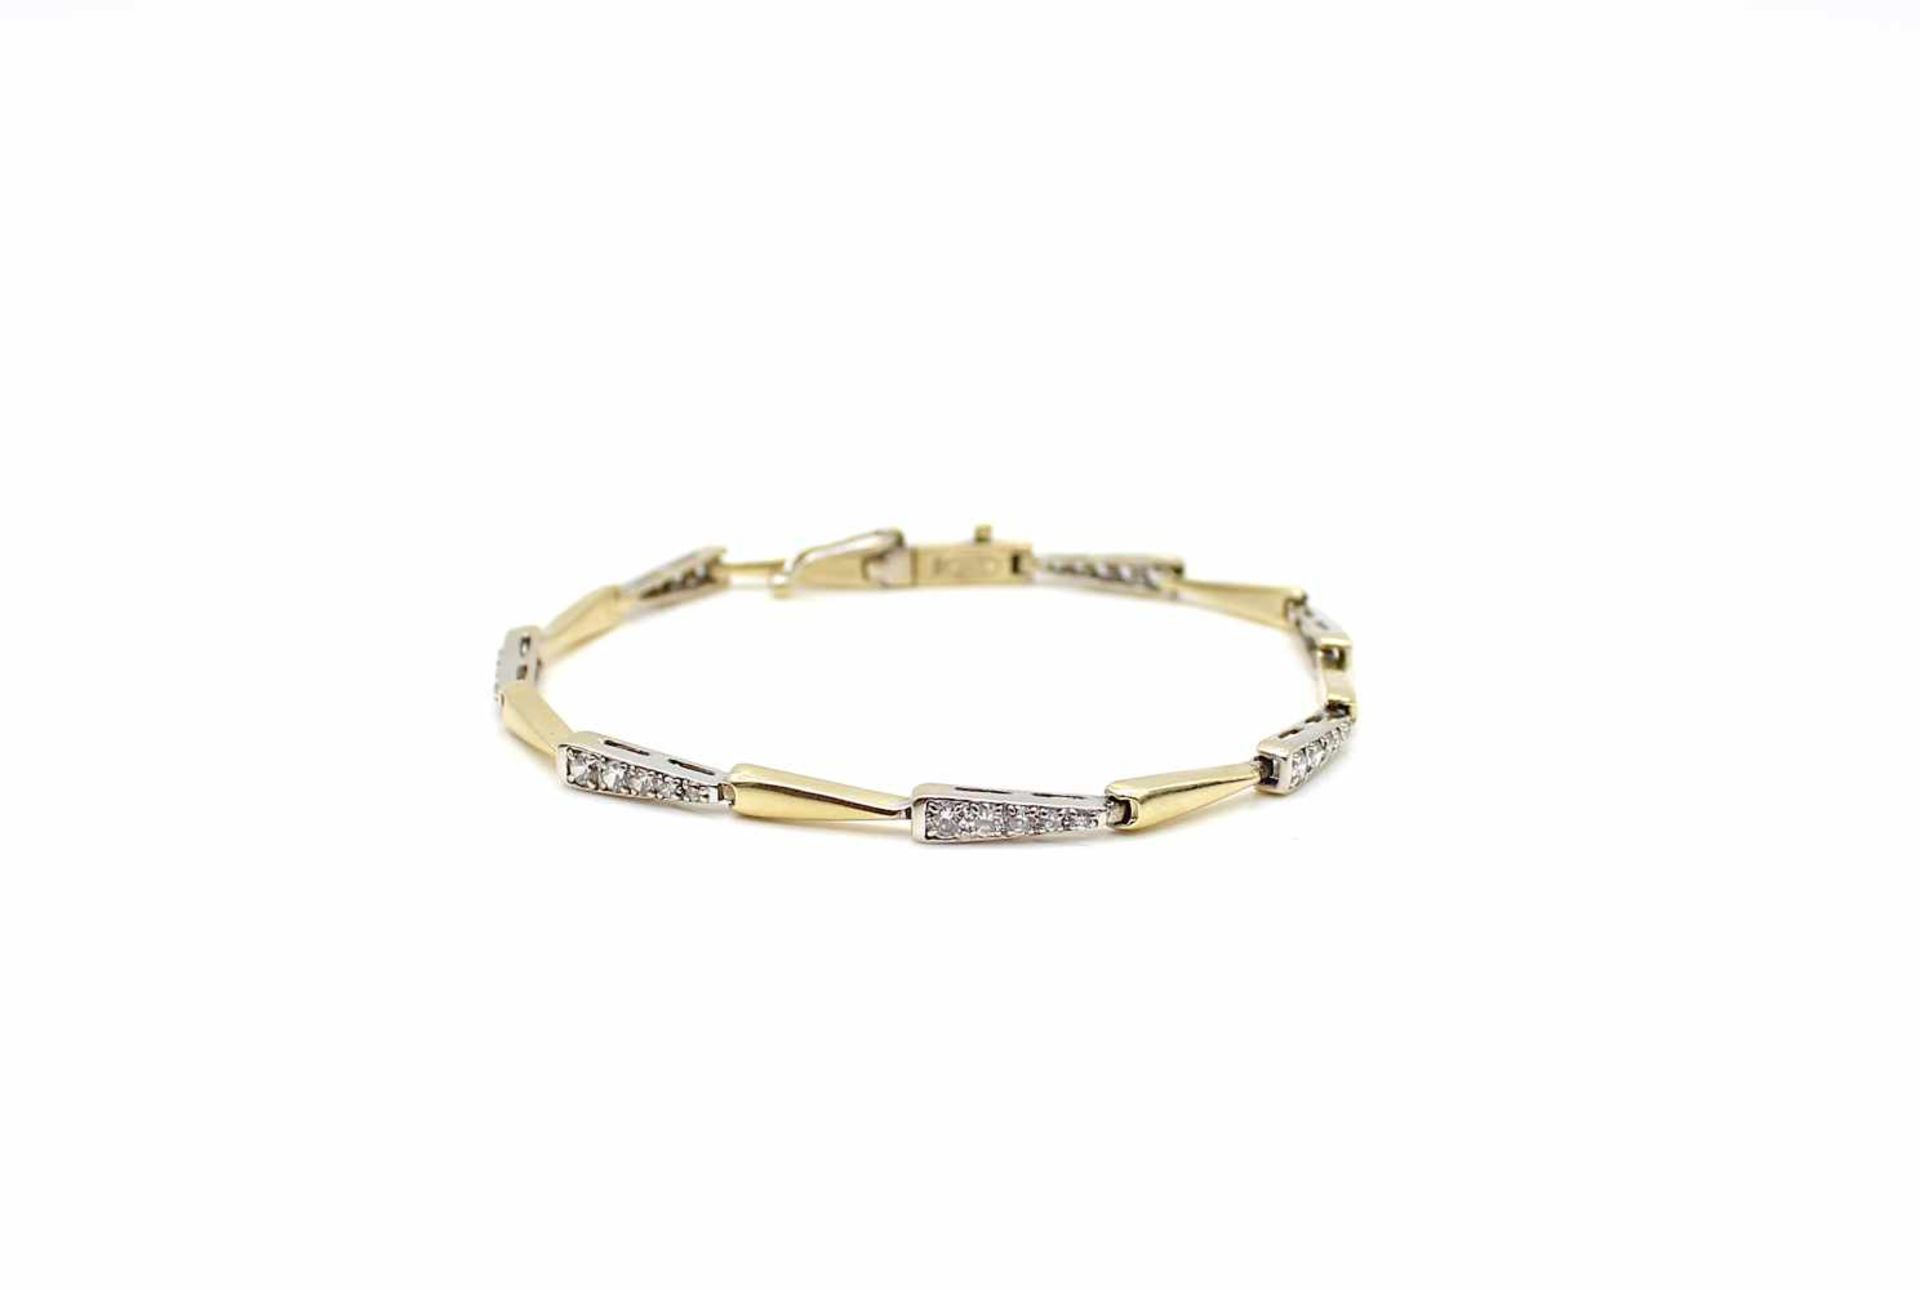 Bracelet in 585 gold with cubic zirconia.weight 6,9 g, length 19 cmArmband aus 585er Gold mit